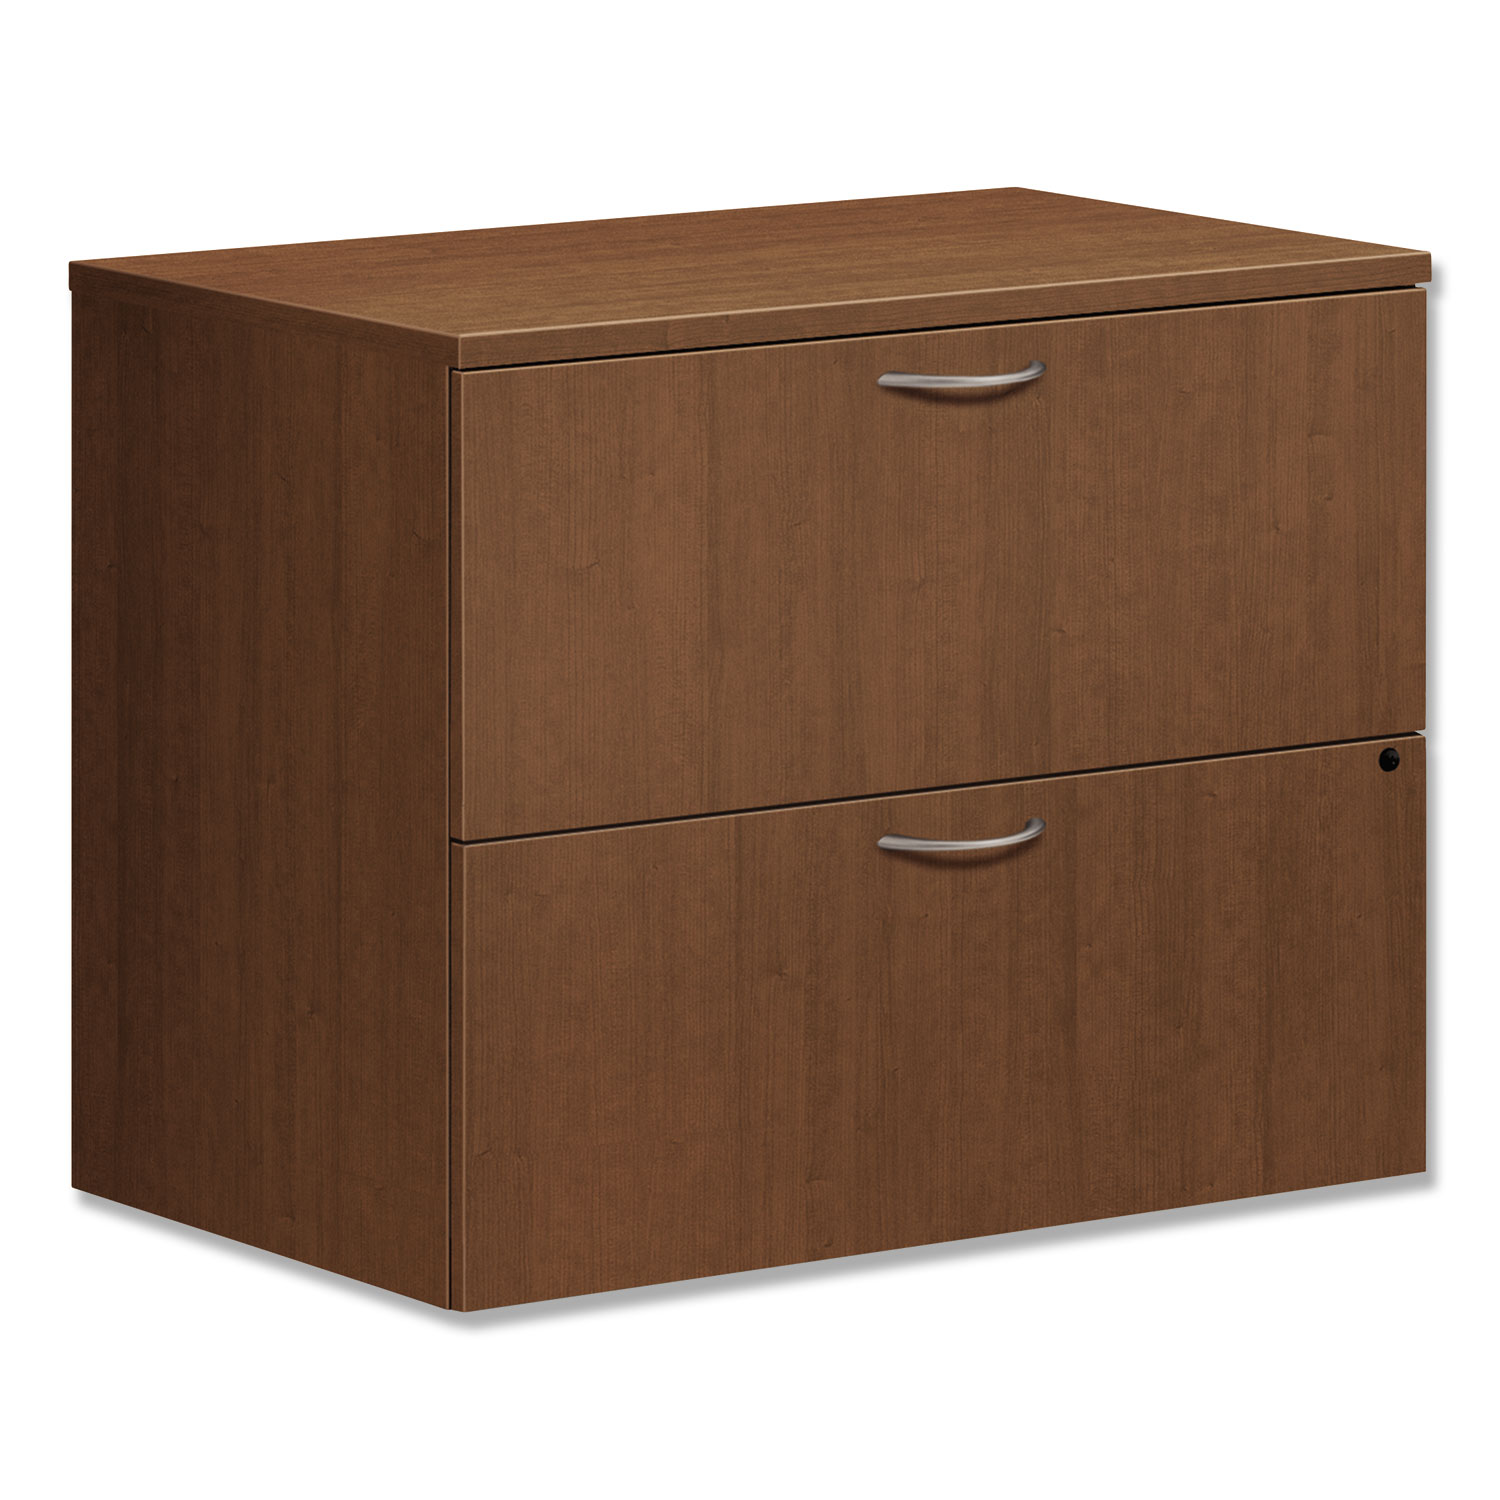 Foundation Lateral File, 35.779w x 19 7/8d x 28.48h, Shaker Cherry